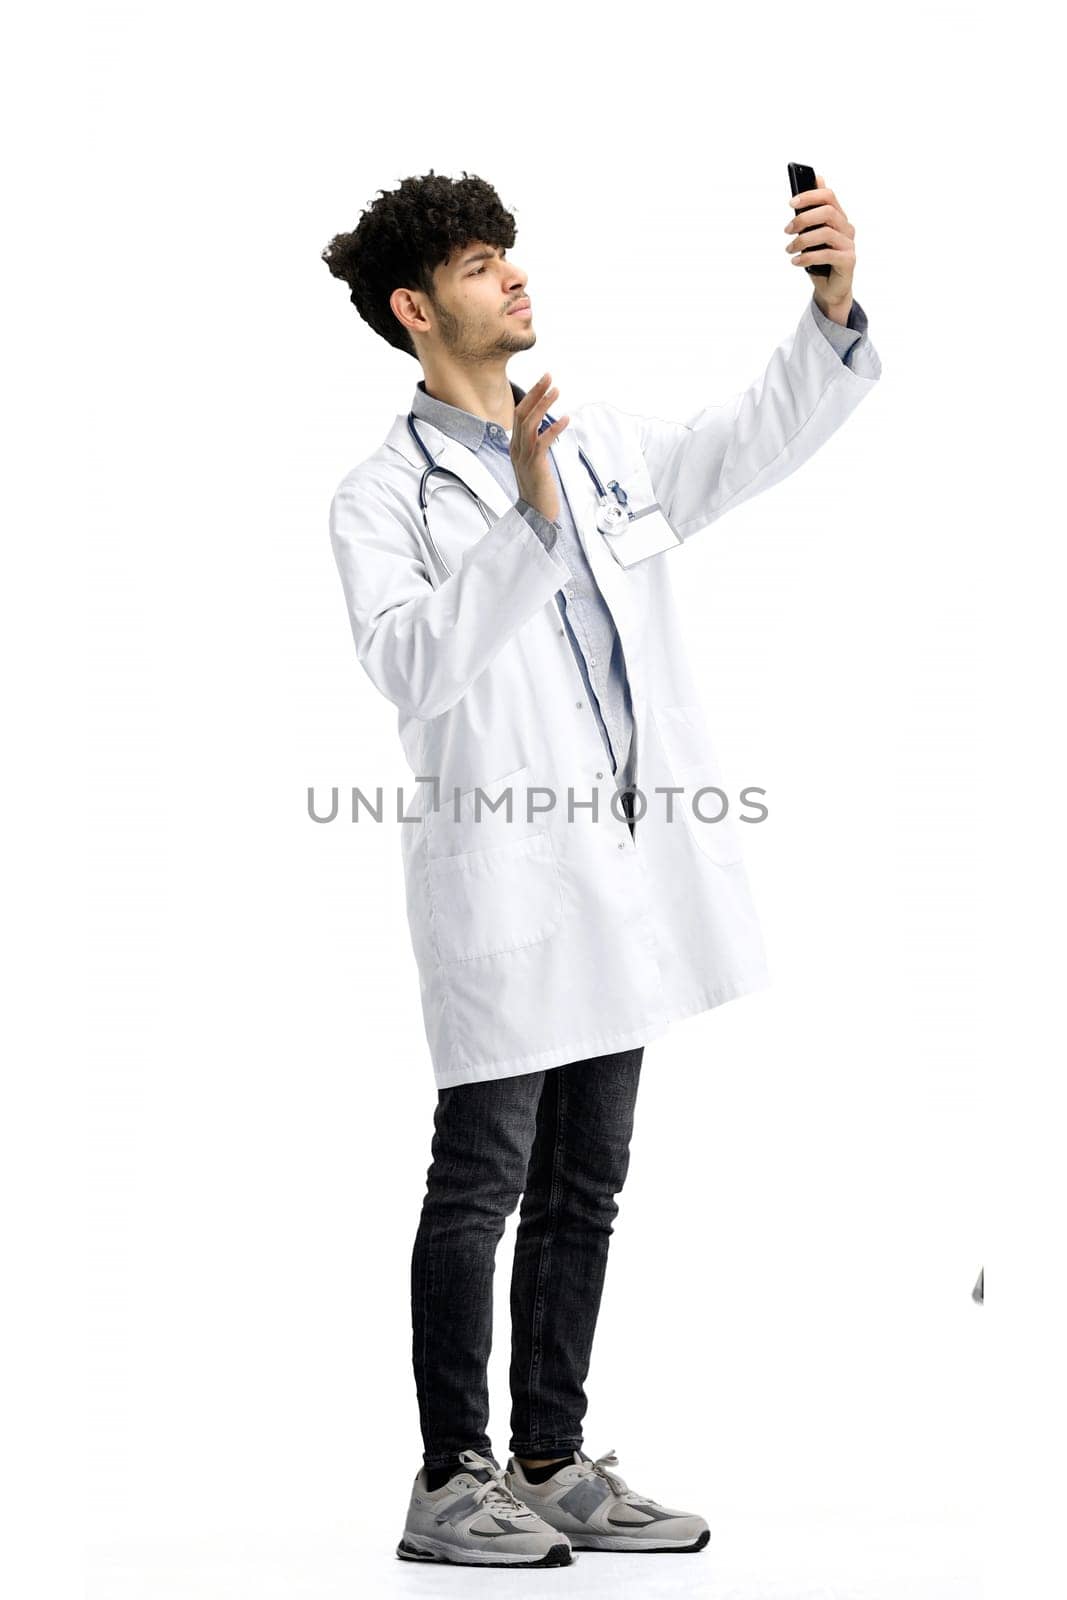 Male doctor, on a white background, full-length, with a phone by Prosto